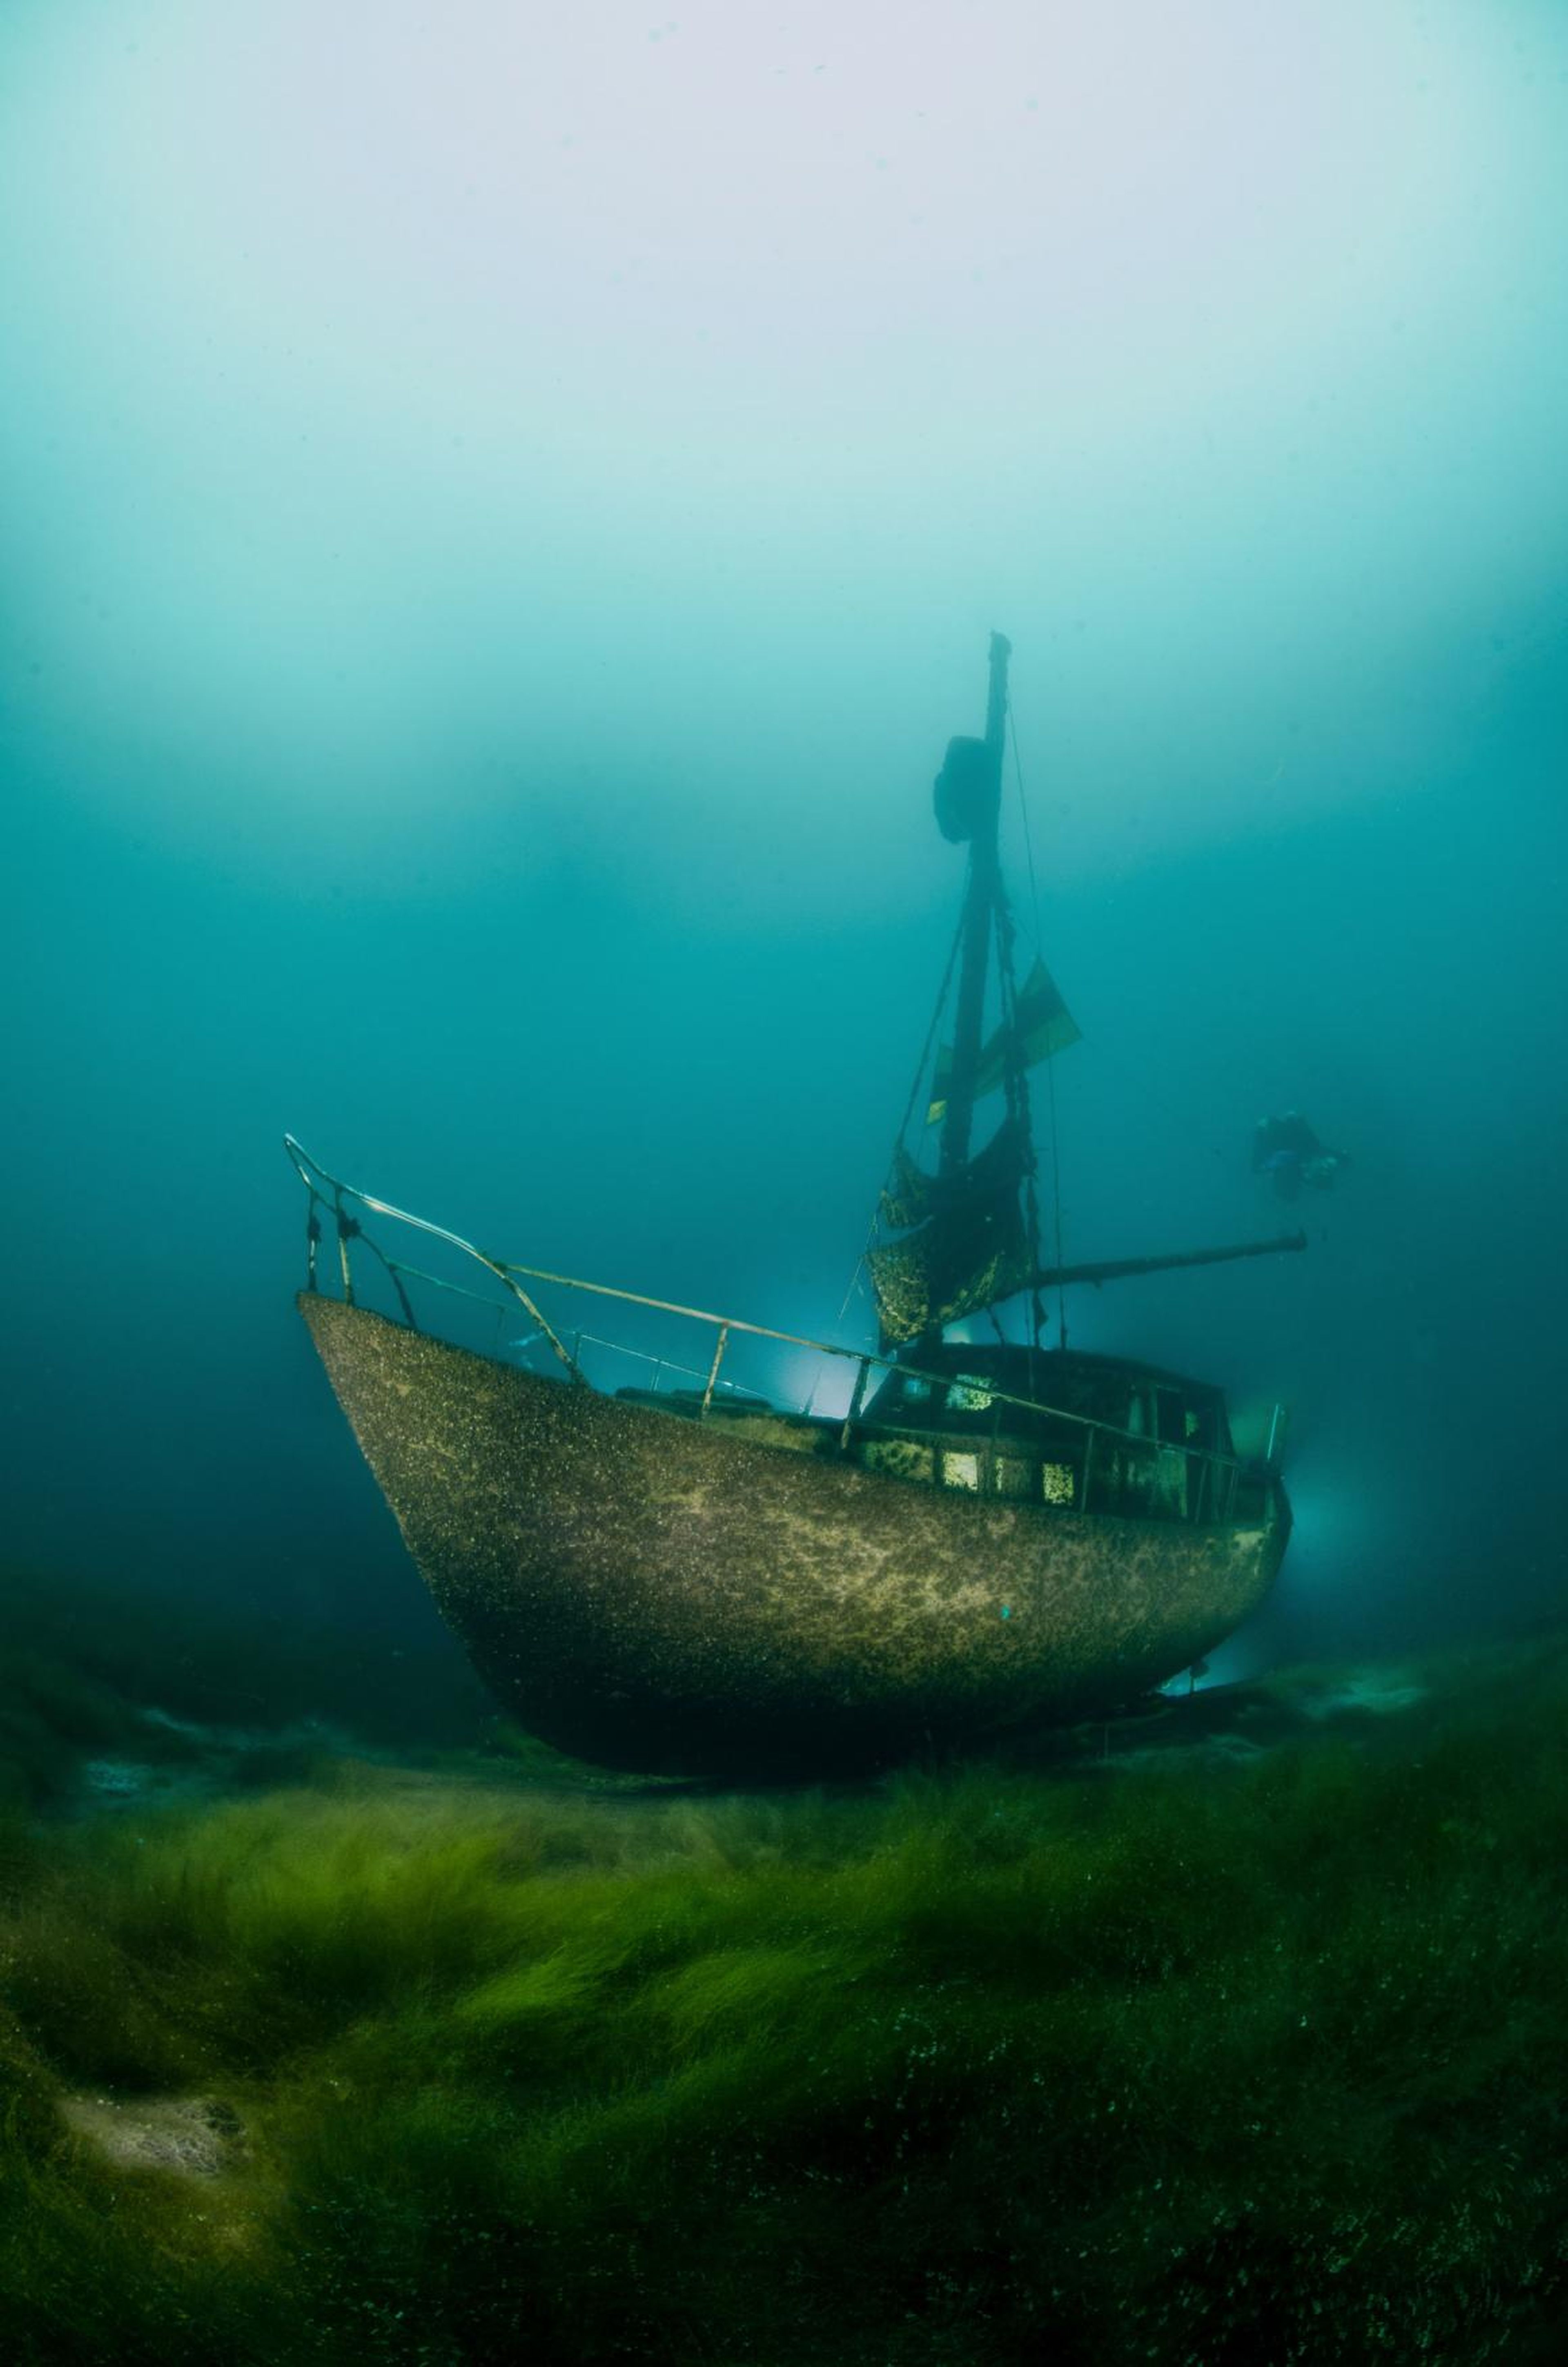 Andersen also took this ghostly image of an almost intact boat sitting tranquilly at the bottom of Lake Kreidesee in Germany.